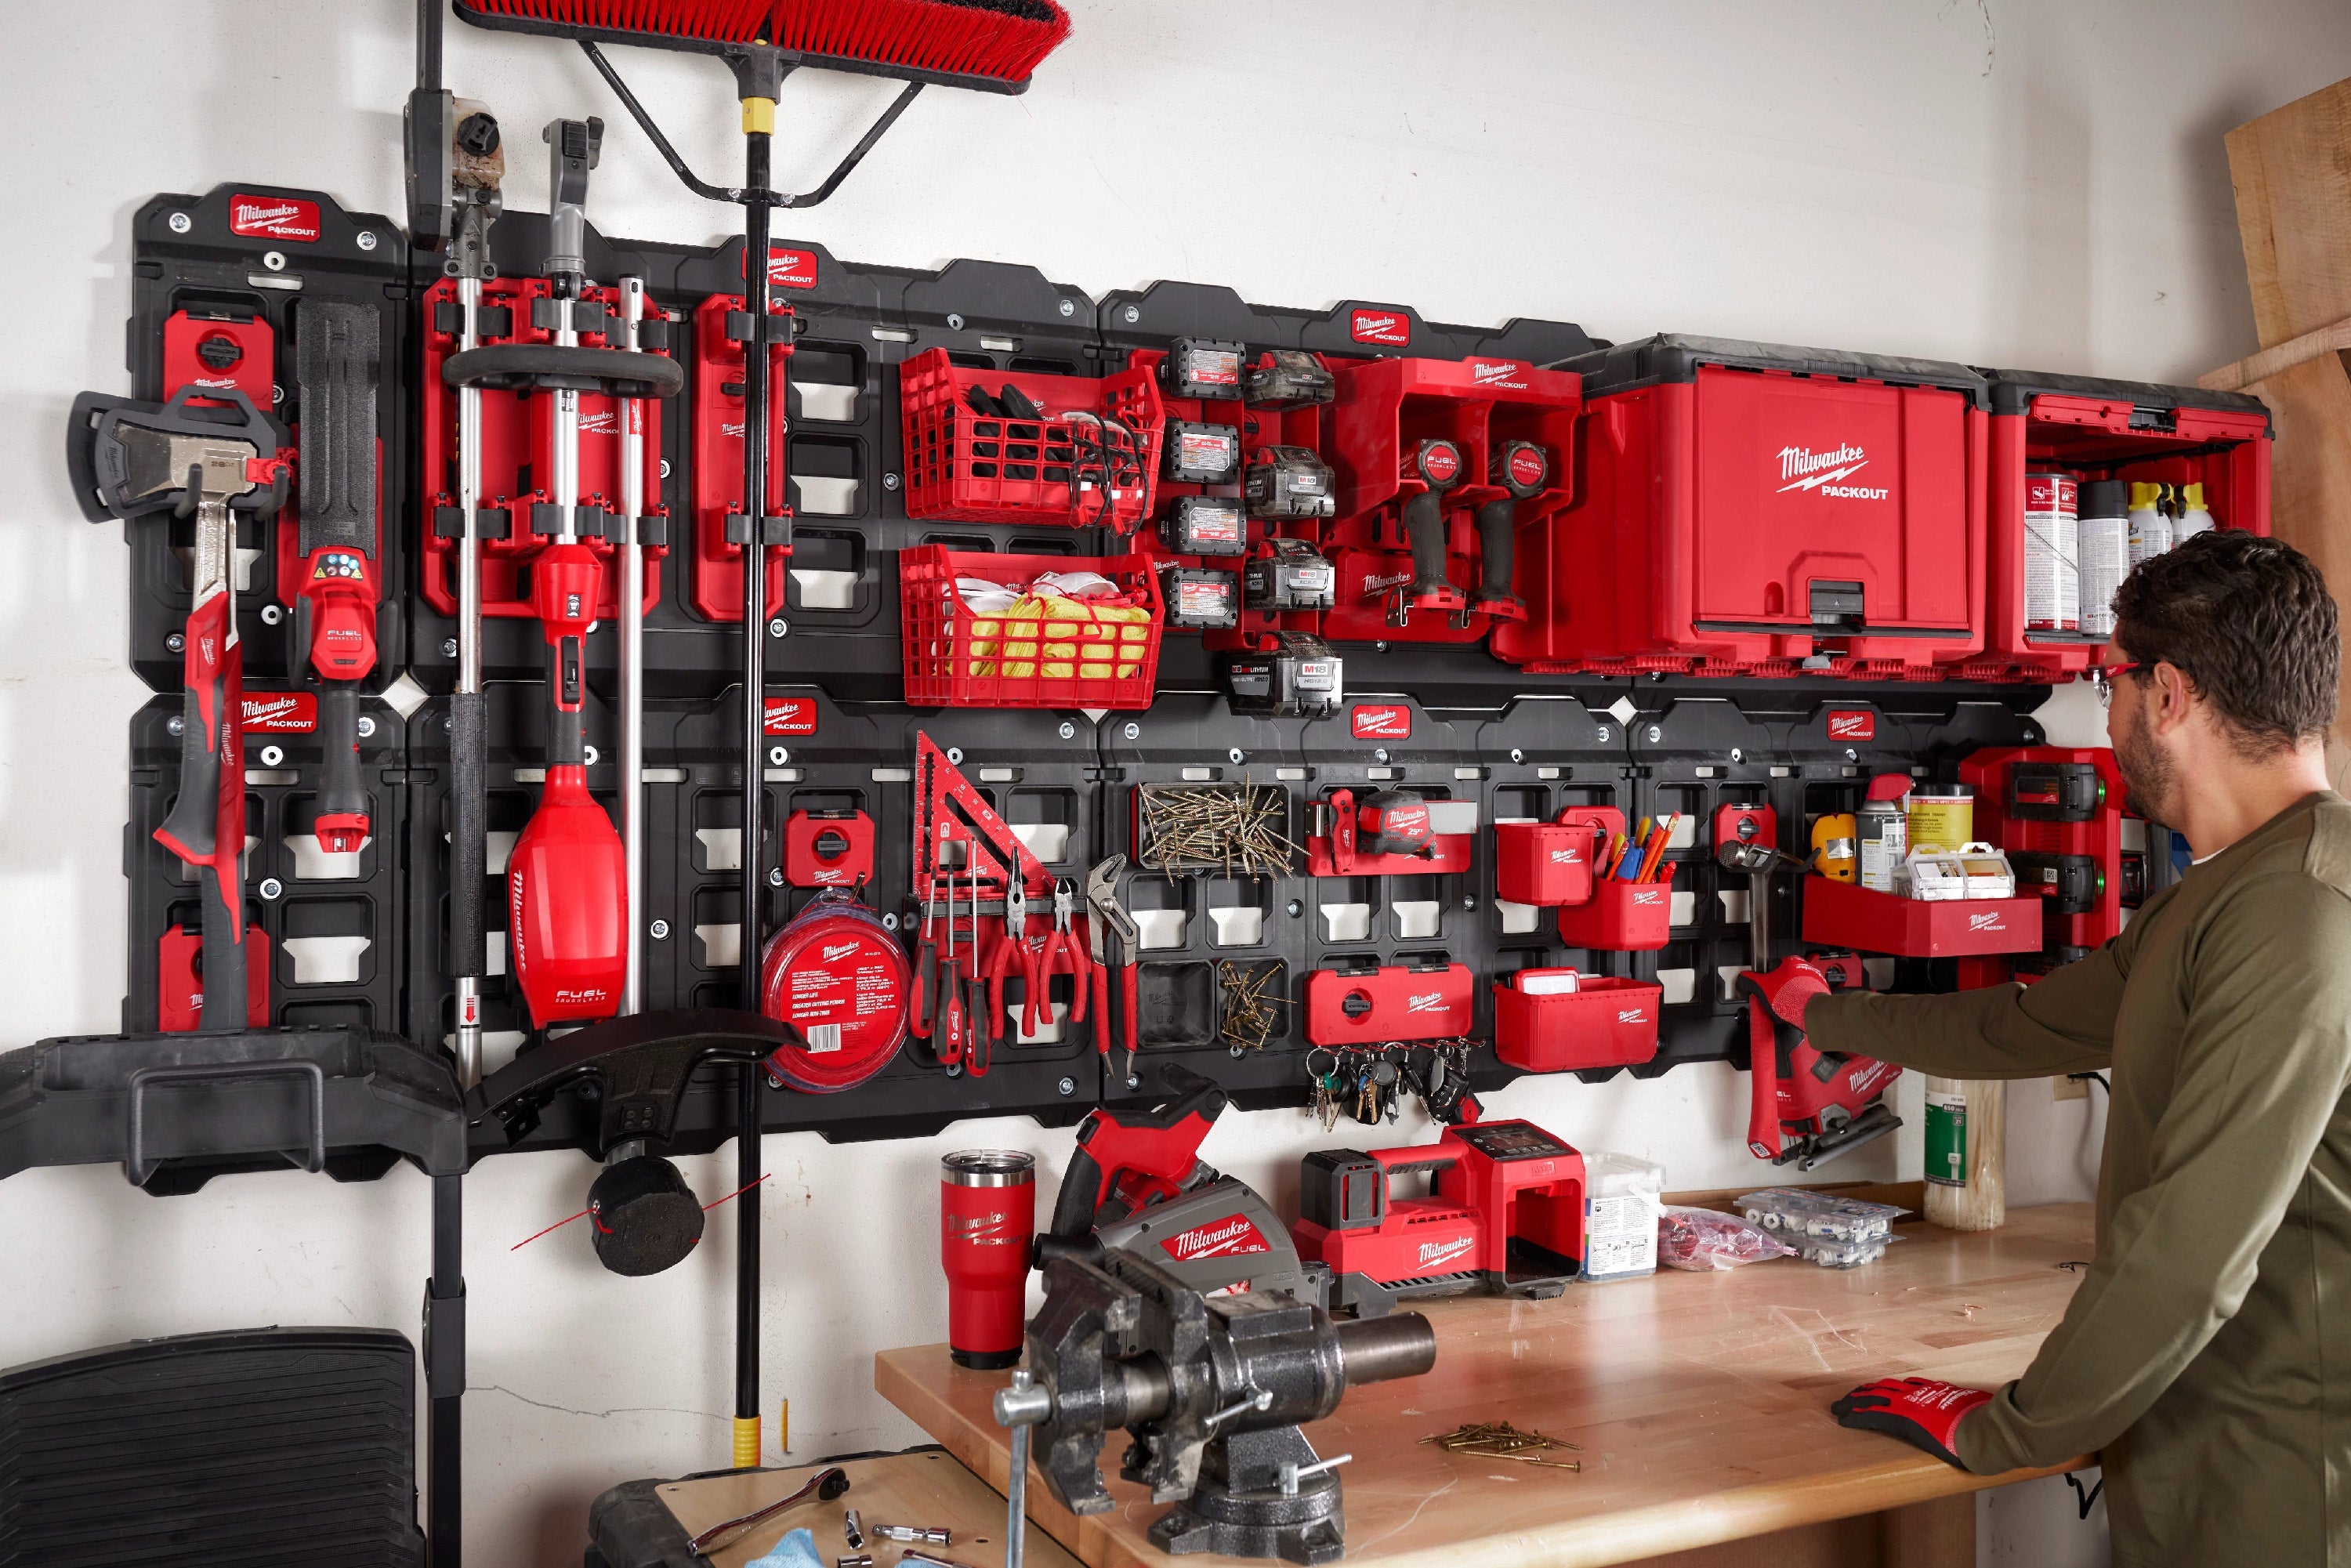 5 Milwaukee Packout Additions Every Home Mechanic Should Have